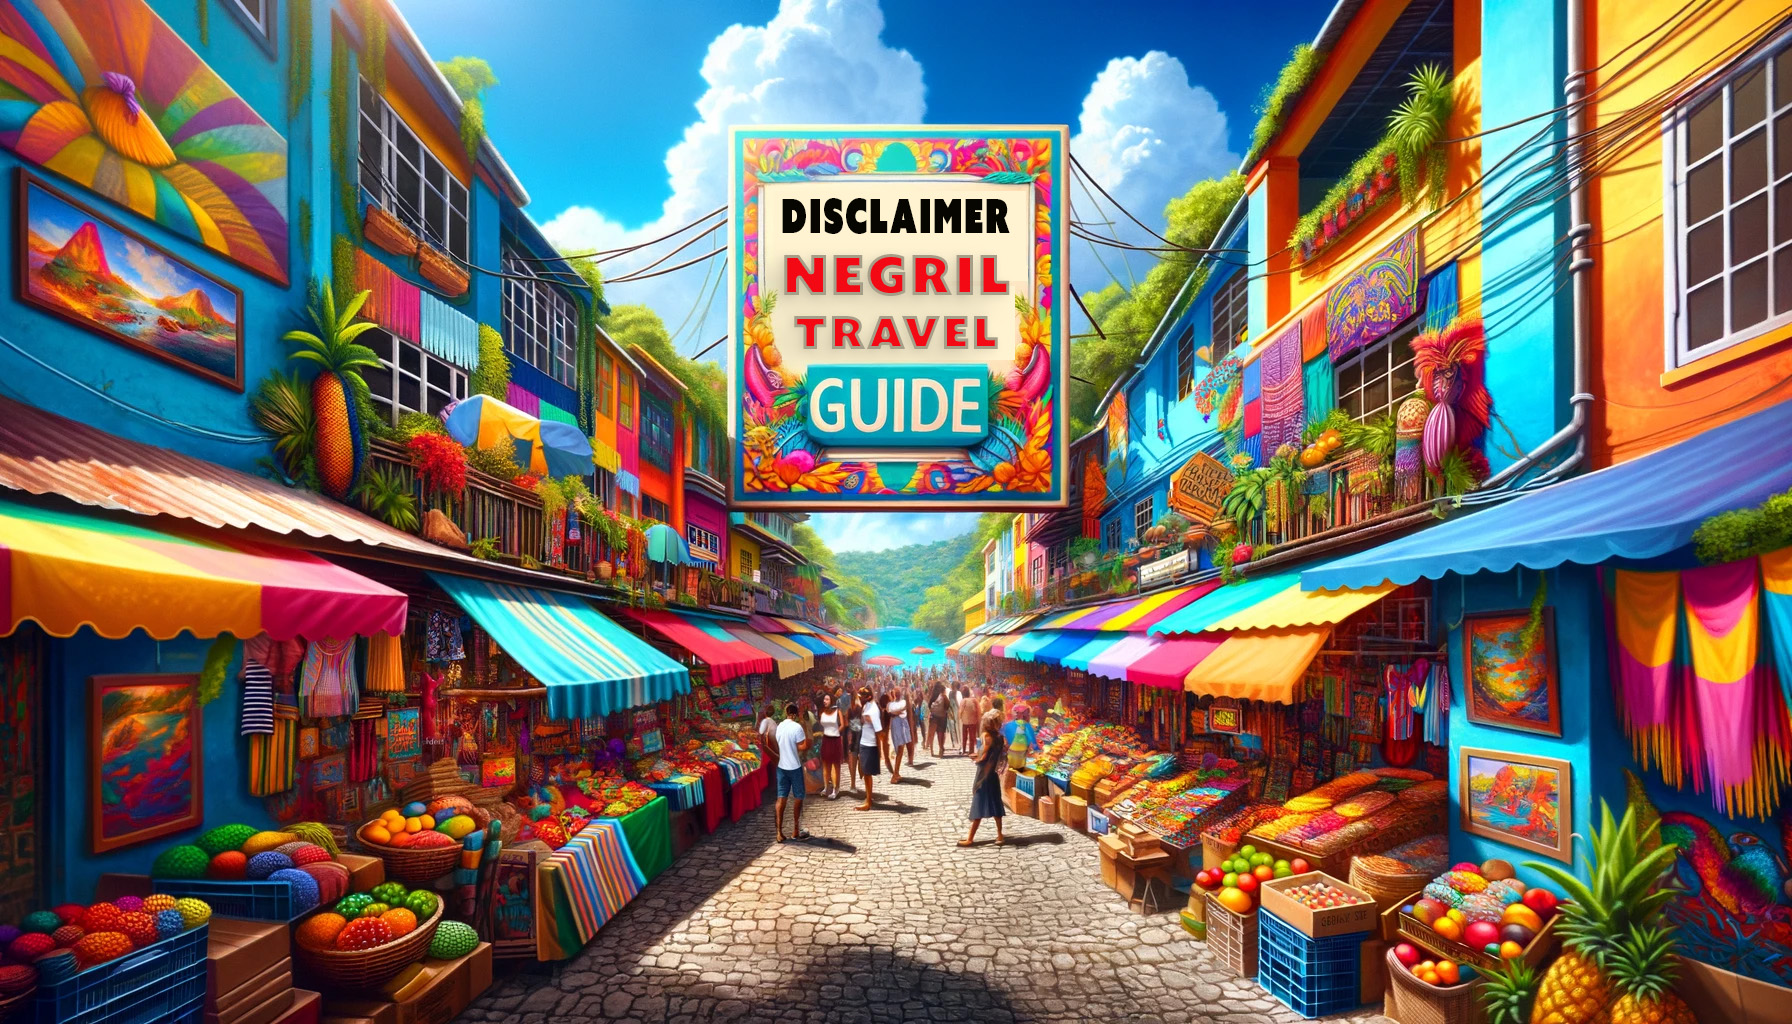 Disclaimer - Negril Travel Guide